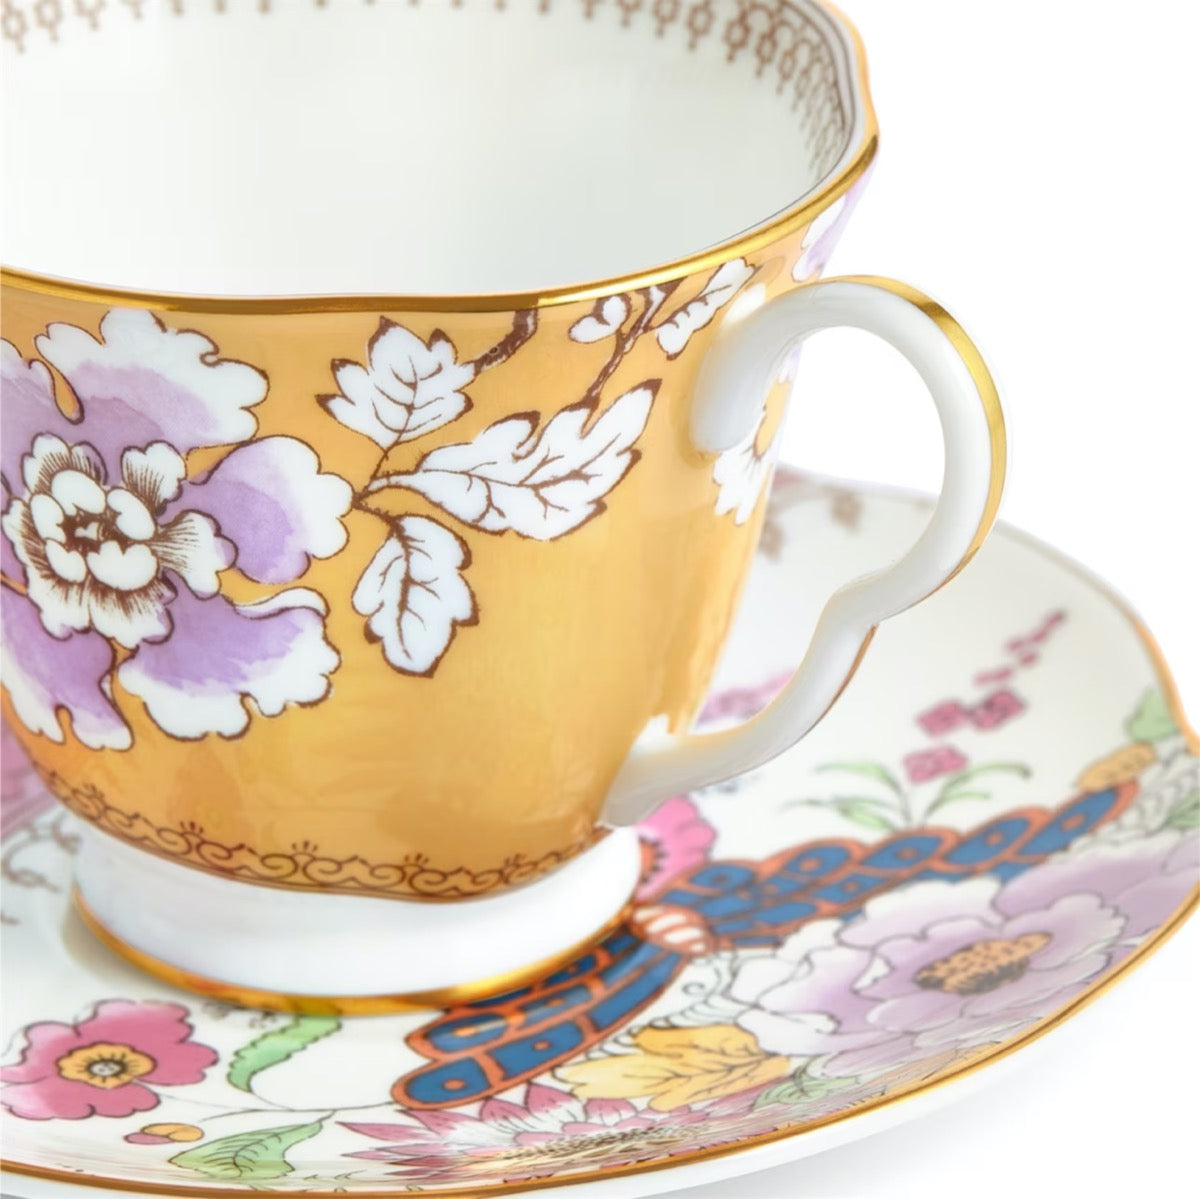 vintage Wedgwood butterfly bloom yellow teacup and saucer set for sale